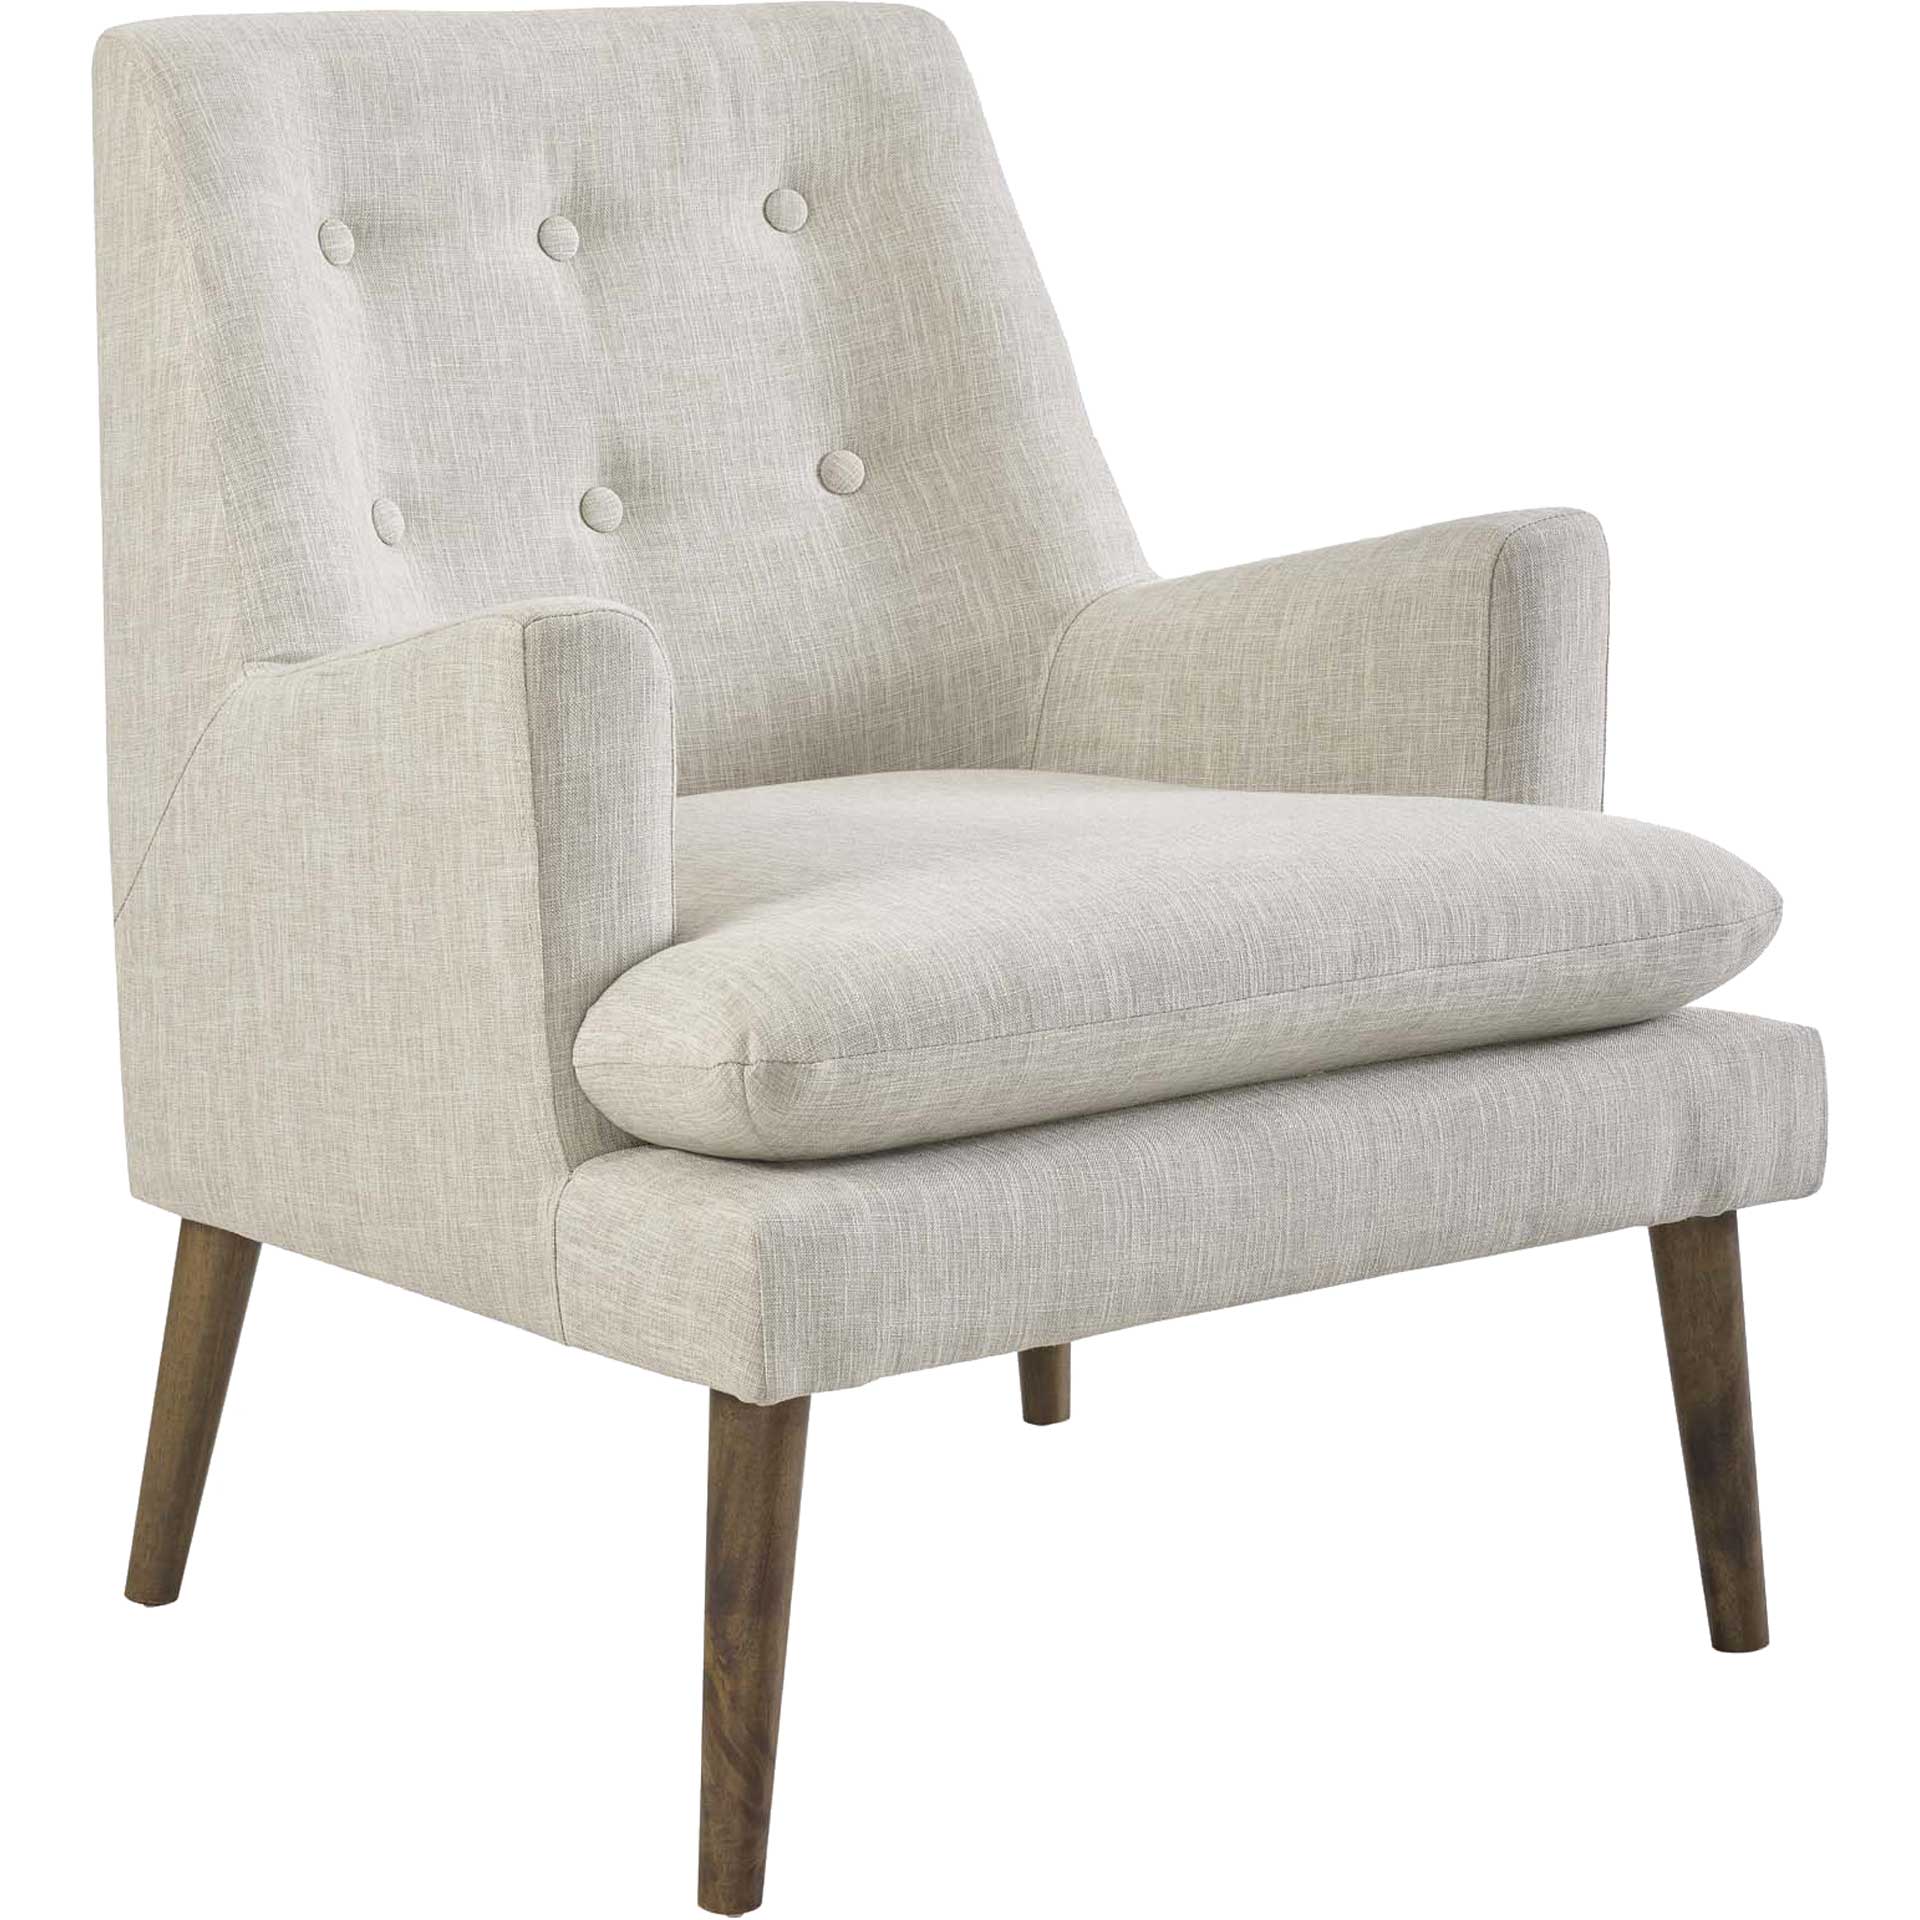 Lucas Upholstered Lounge Chair Beige